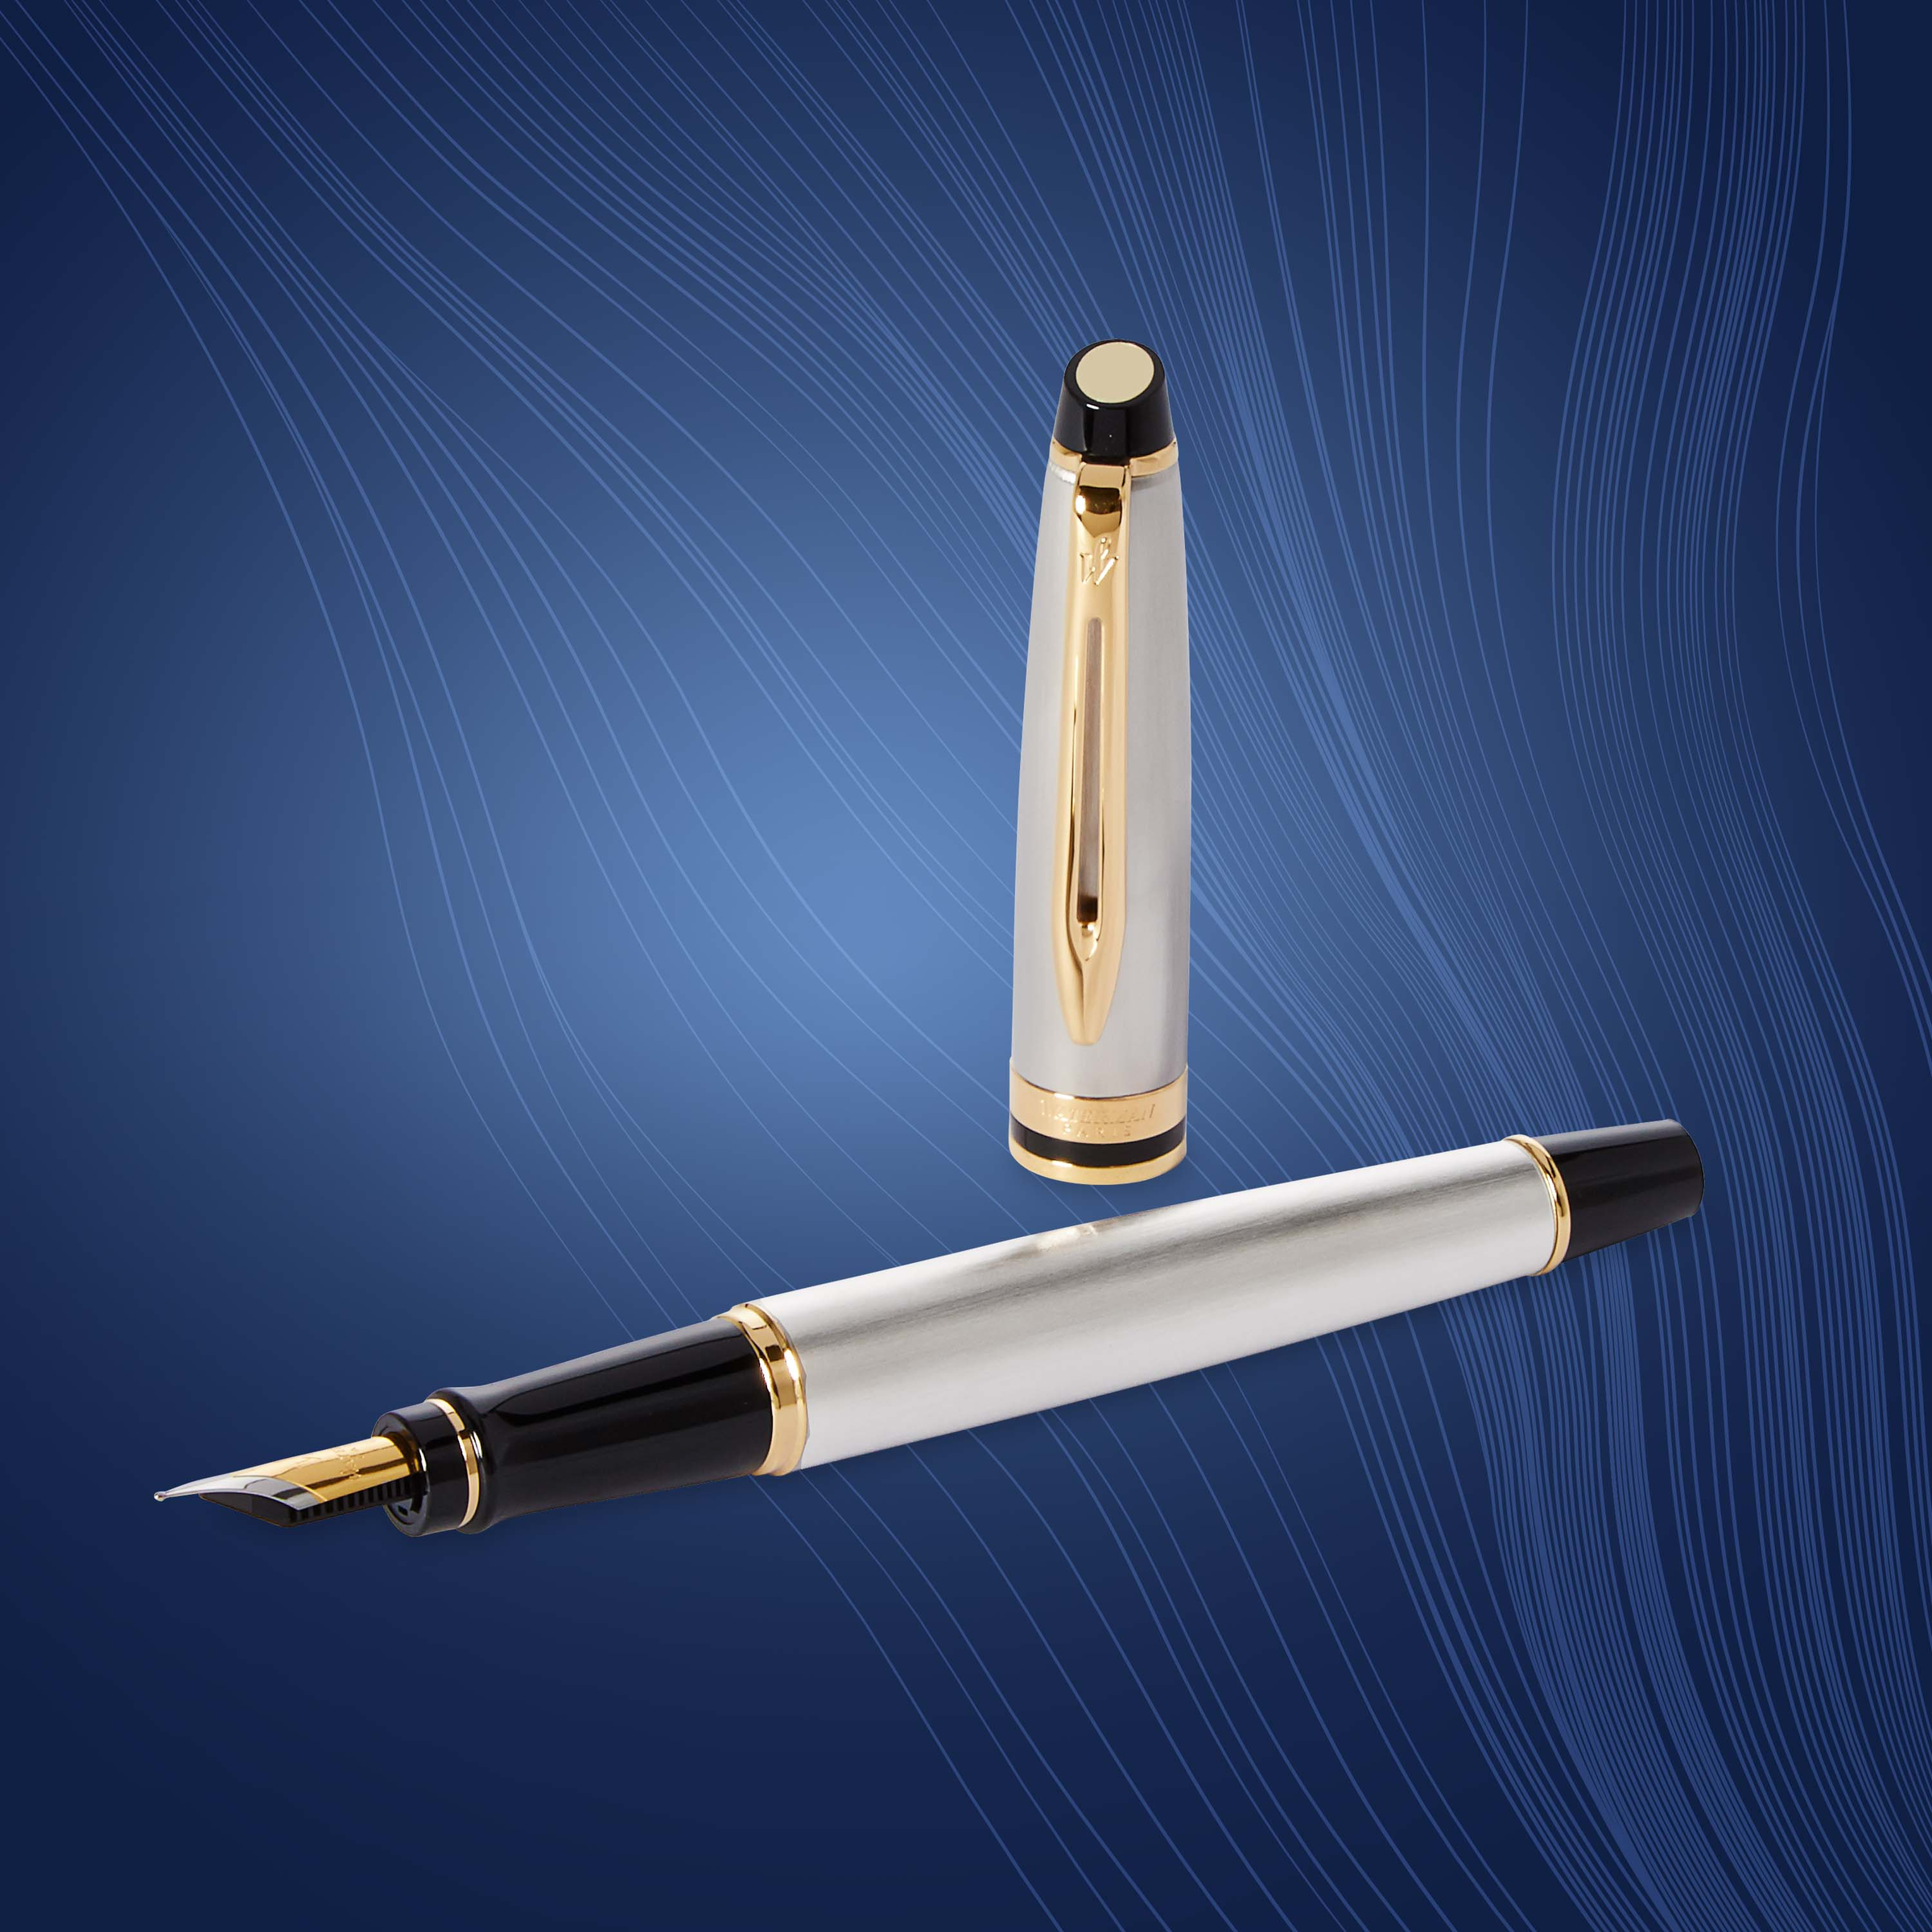 Waterman Expert Stainless Steel Gold Trim Fountain Pen - Pencraft the boutique